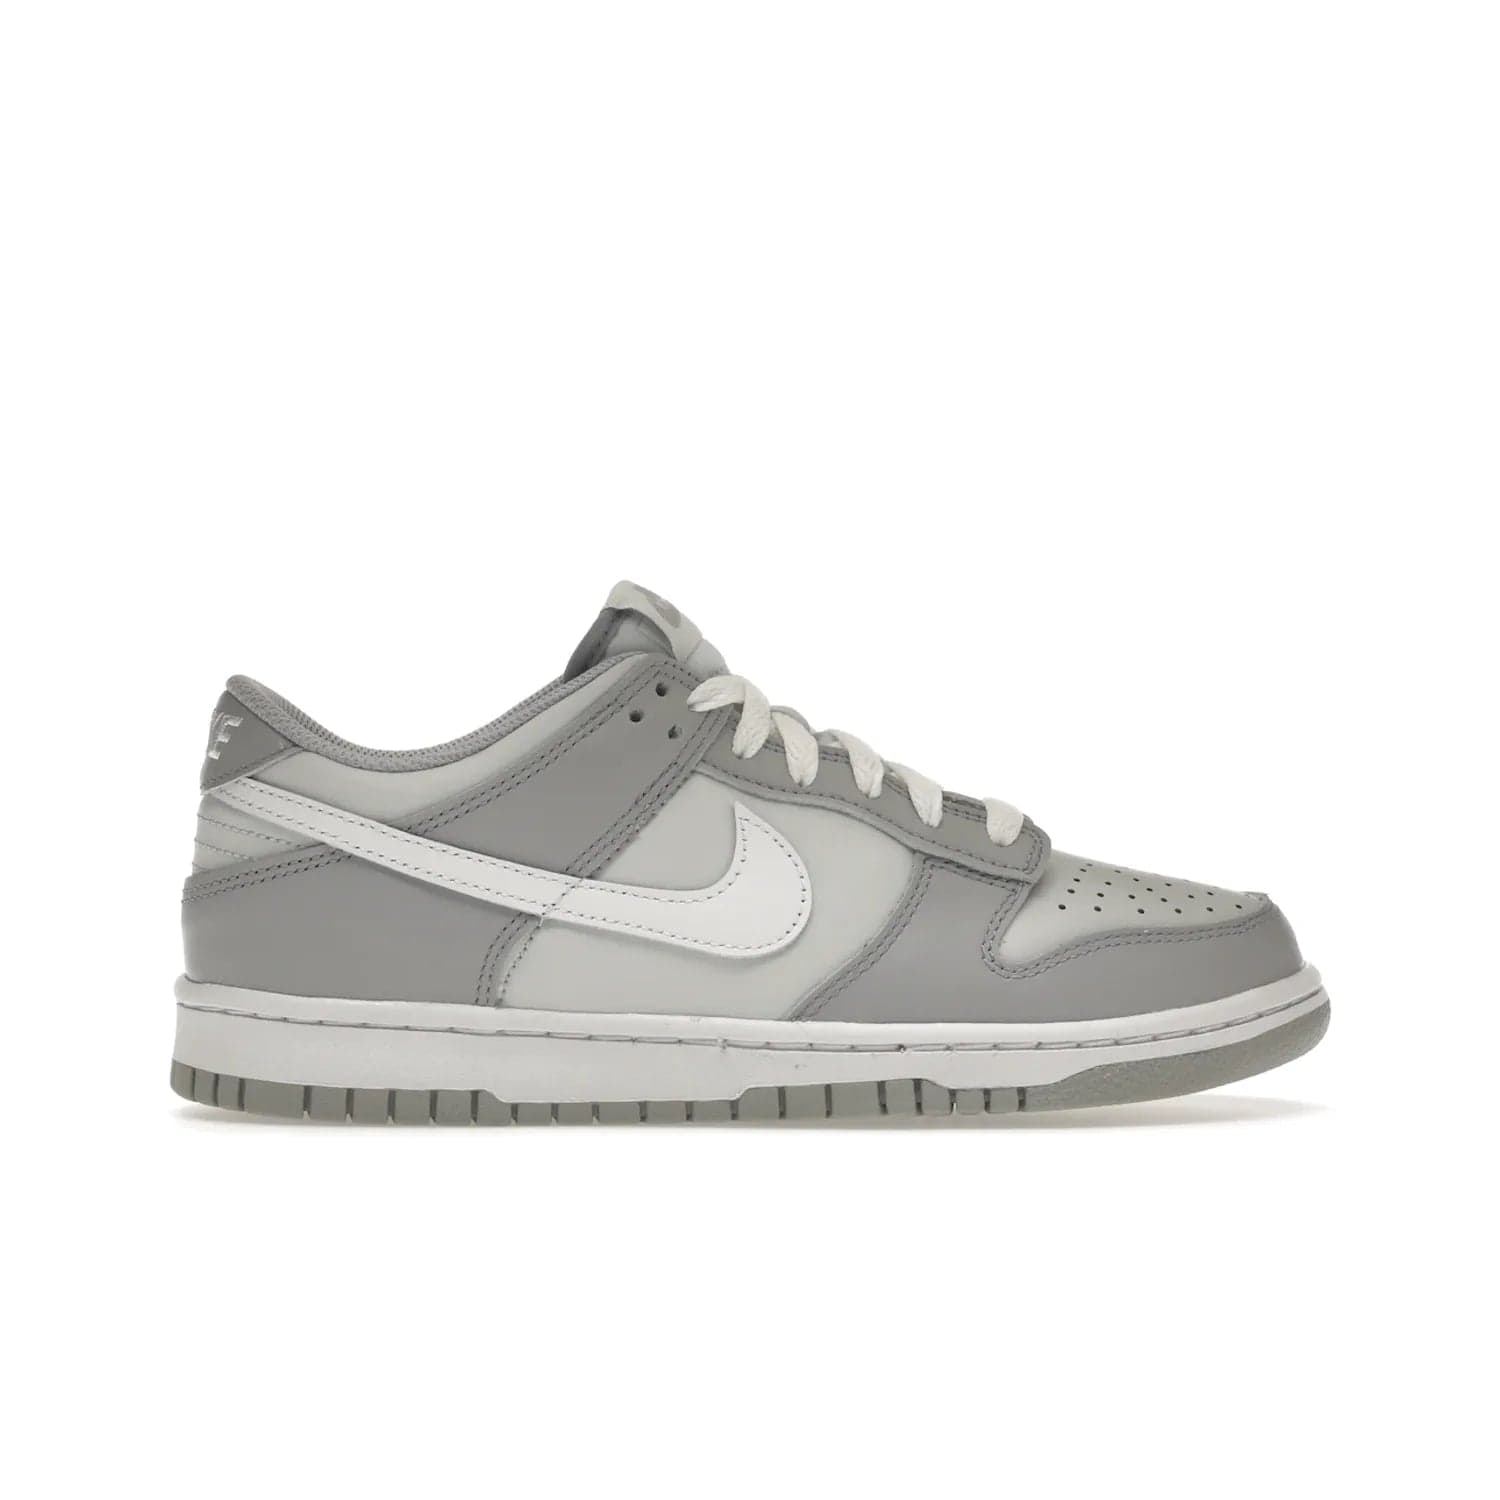 Nike Dunk Low Two-Toned Grey (GS) - Image 1 - Only at www.BallersClubKickz.com - Stylish Nike Dunk Low GS Two-Toned Grey featuring leather build, light/dark grey shades, white Swoosh logo & gray rubber outsole. Get ready to make a statement with this timeless classic released in March 2022.